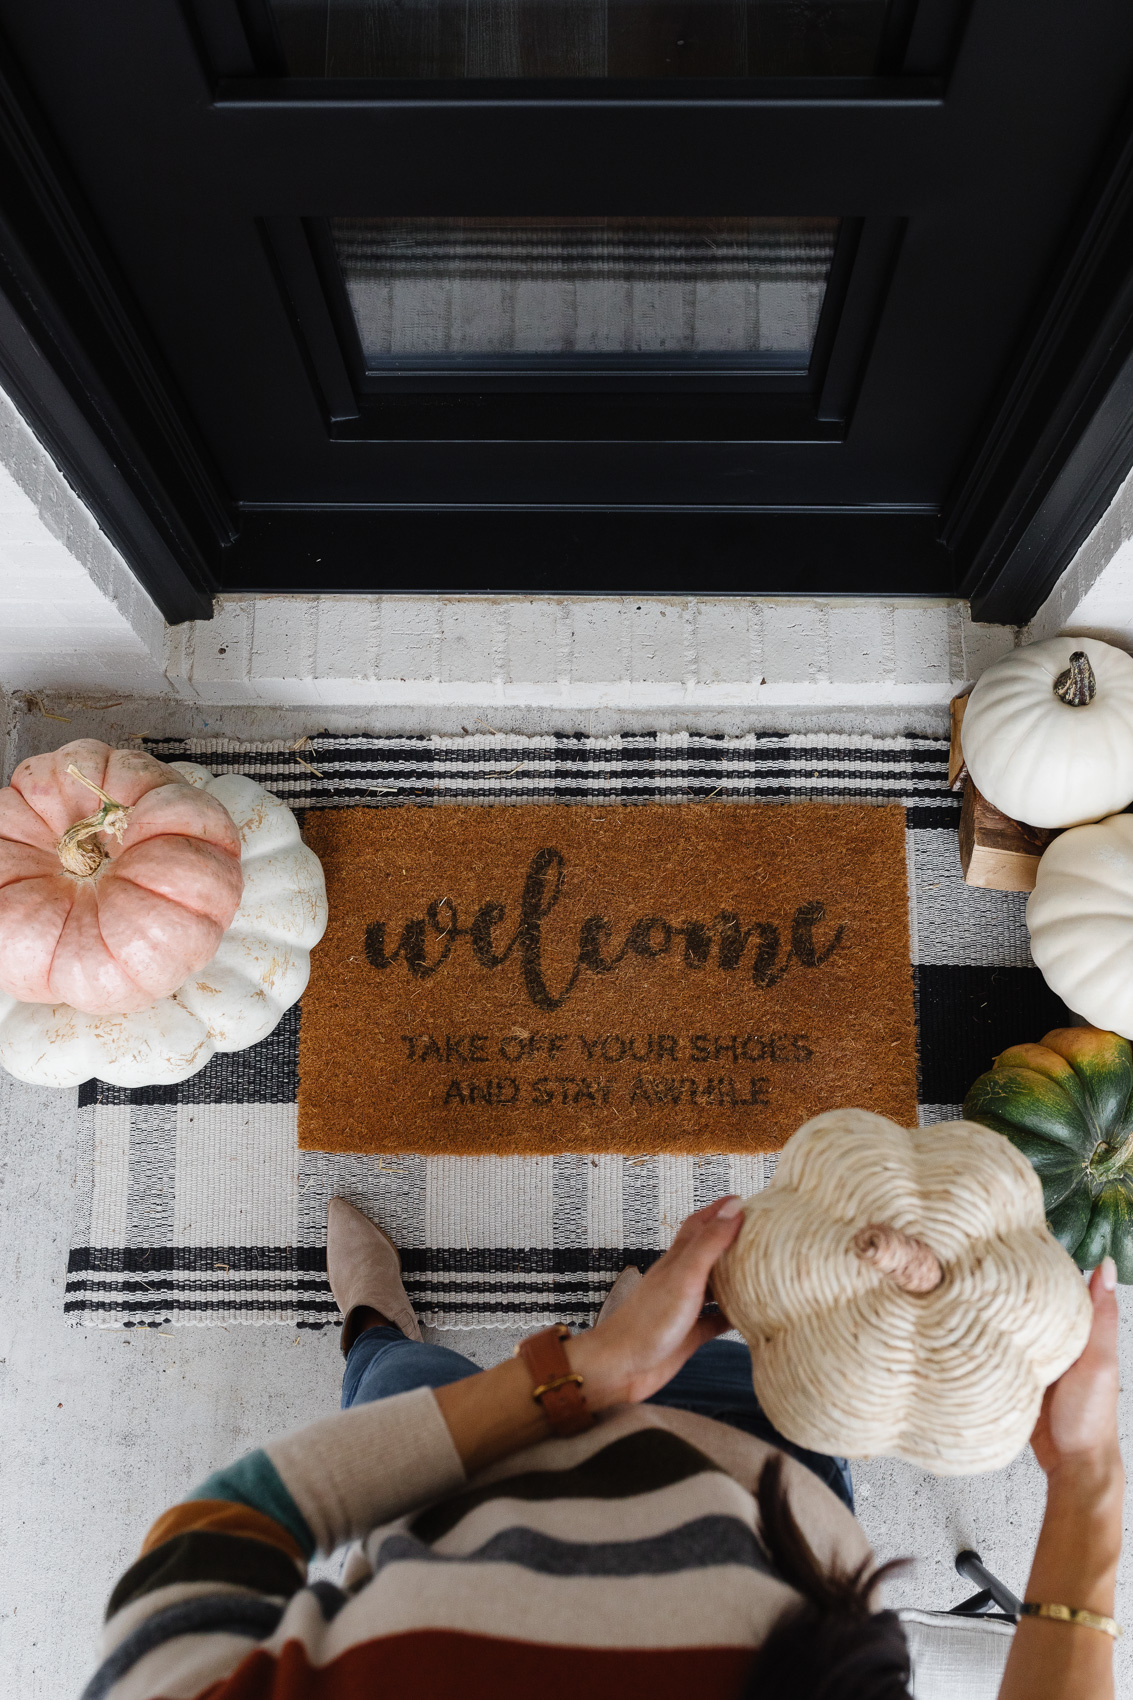 Fall front porch decor with faux and real pumpkins, plaid rug, doormat to remind guests to take off their shoes and iron front door